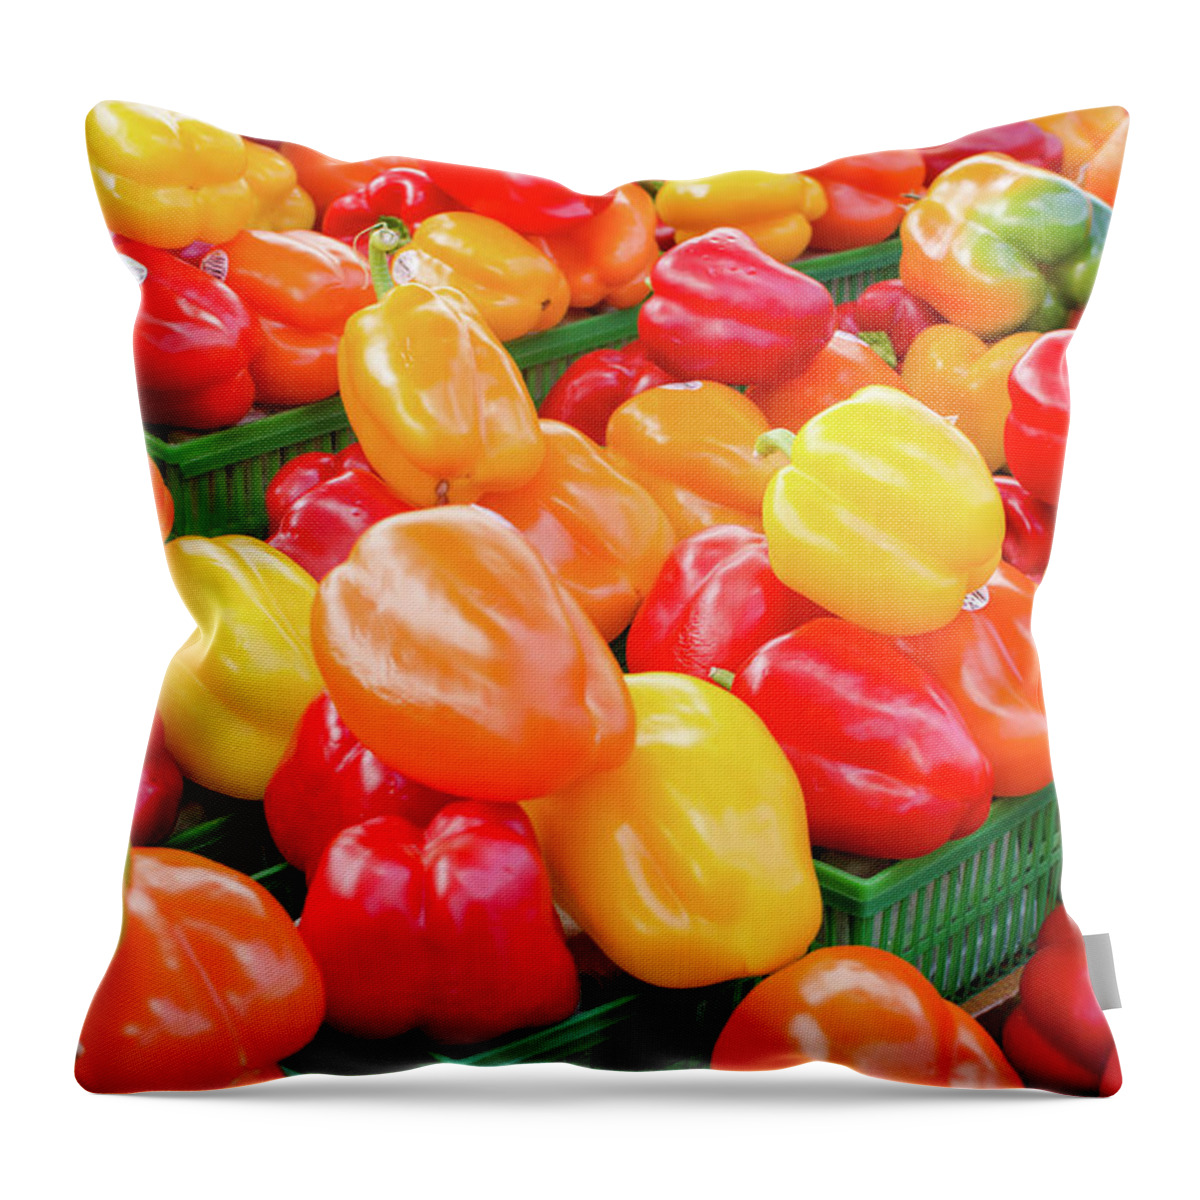 Red Bell Pepper Throw Pillow featuring the photograph Mixed Bell Peppers At The Market by Danielle Donders